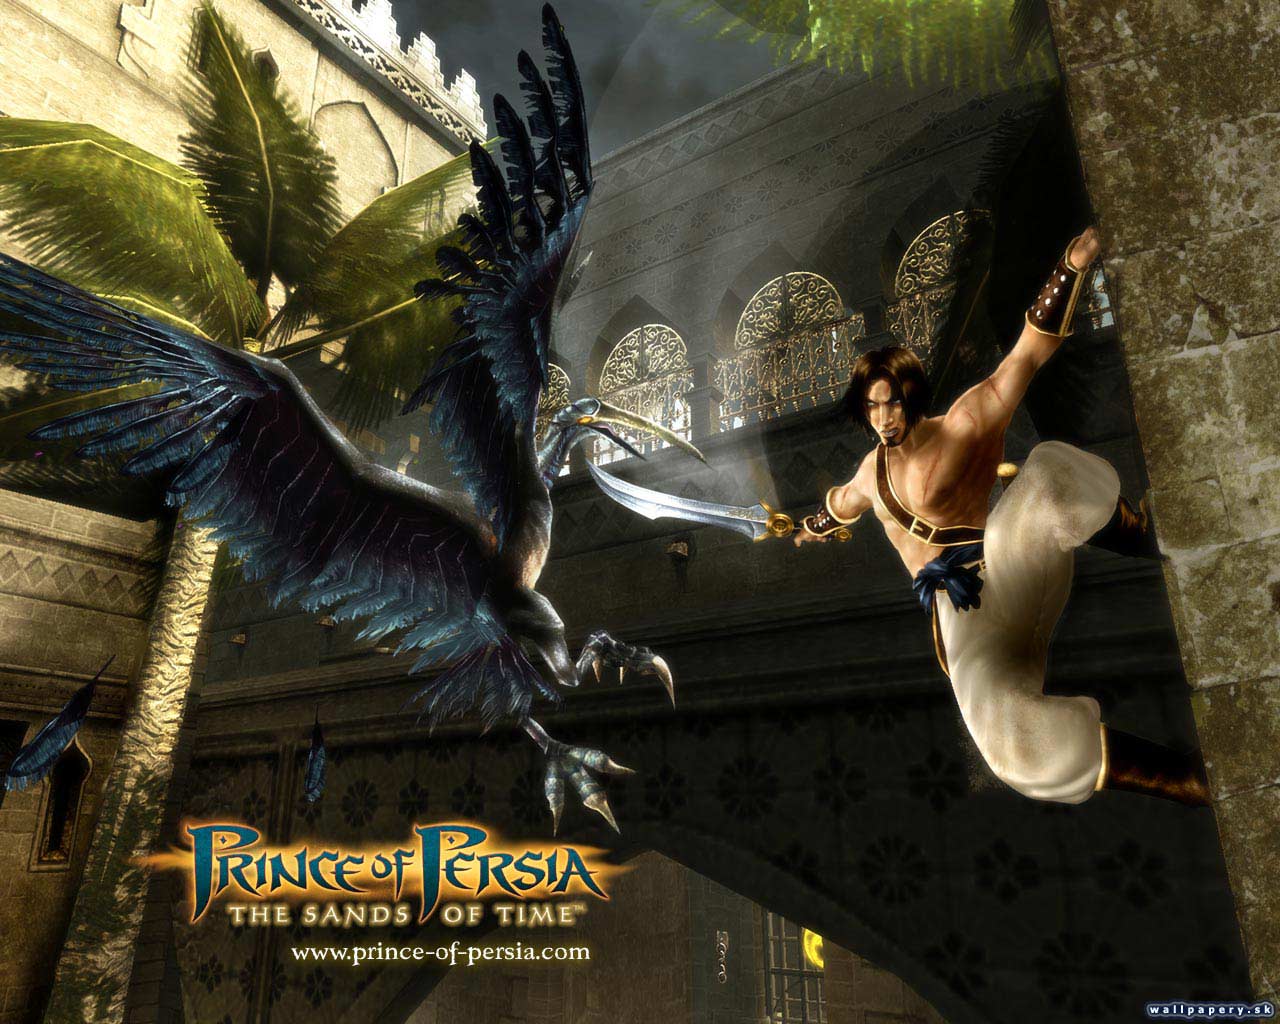 Prince of Persia: The Sands of Time - wallpaper 11